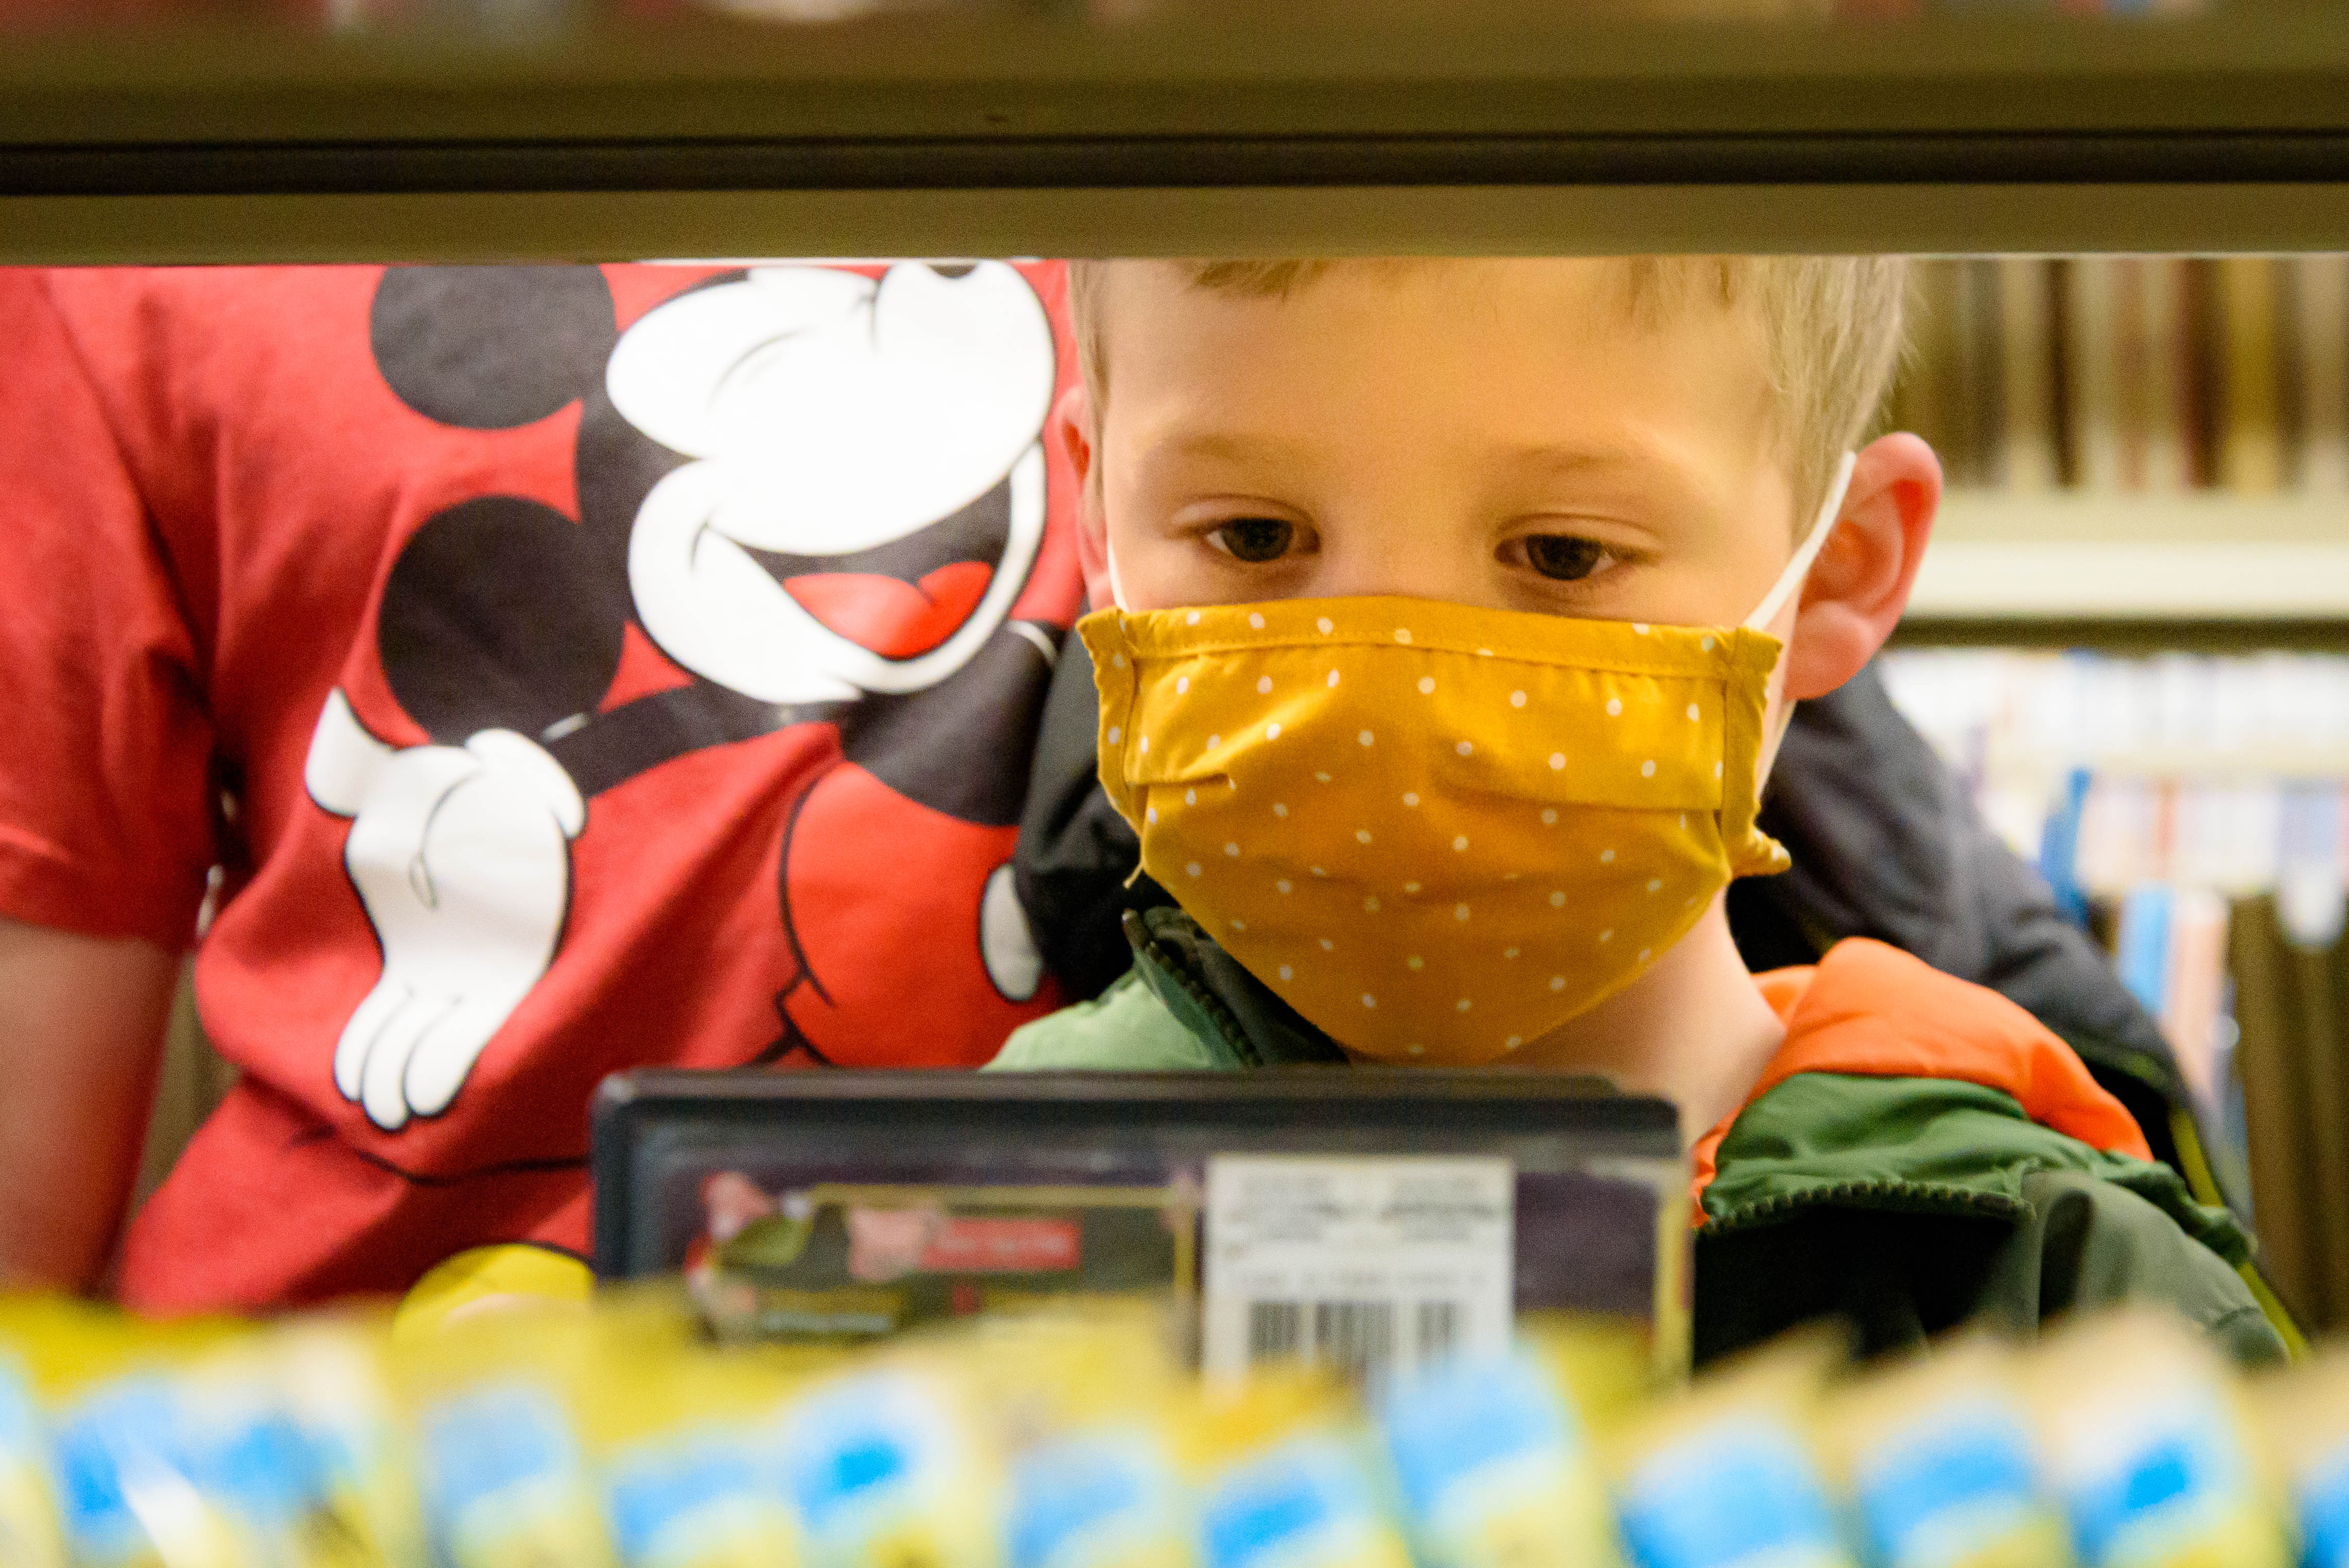 Masks at the Library with New CDC Guidance